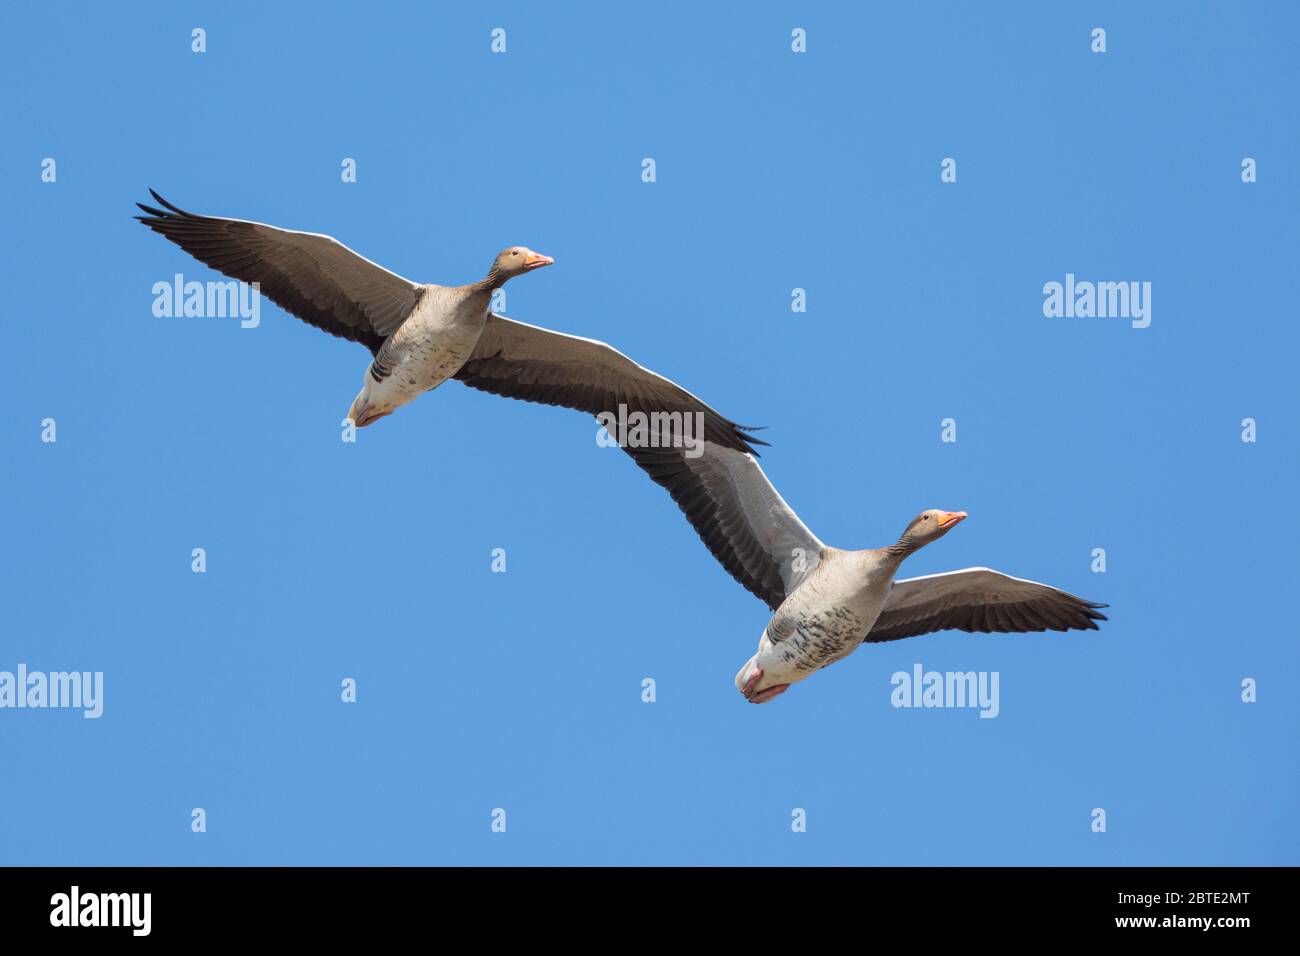 greylag goose (Anser anser), two greylang geese in flight under the blue sky, view from below, Germany, Bavaria, Isental Stock Photo